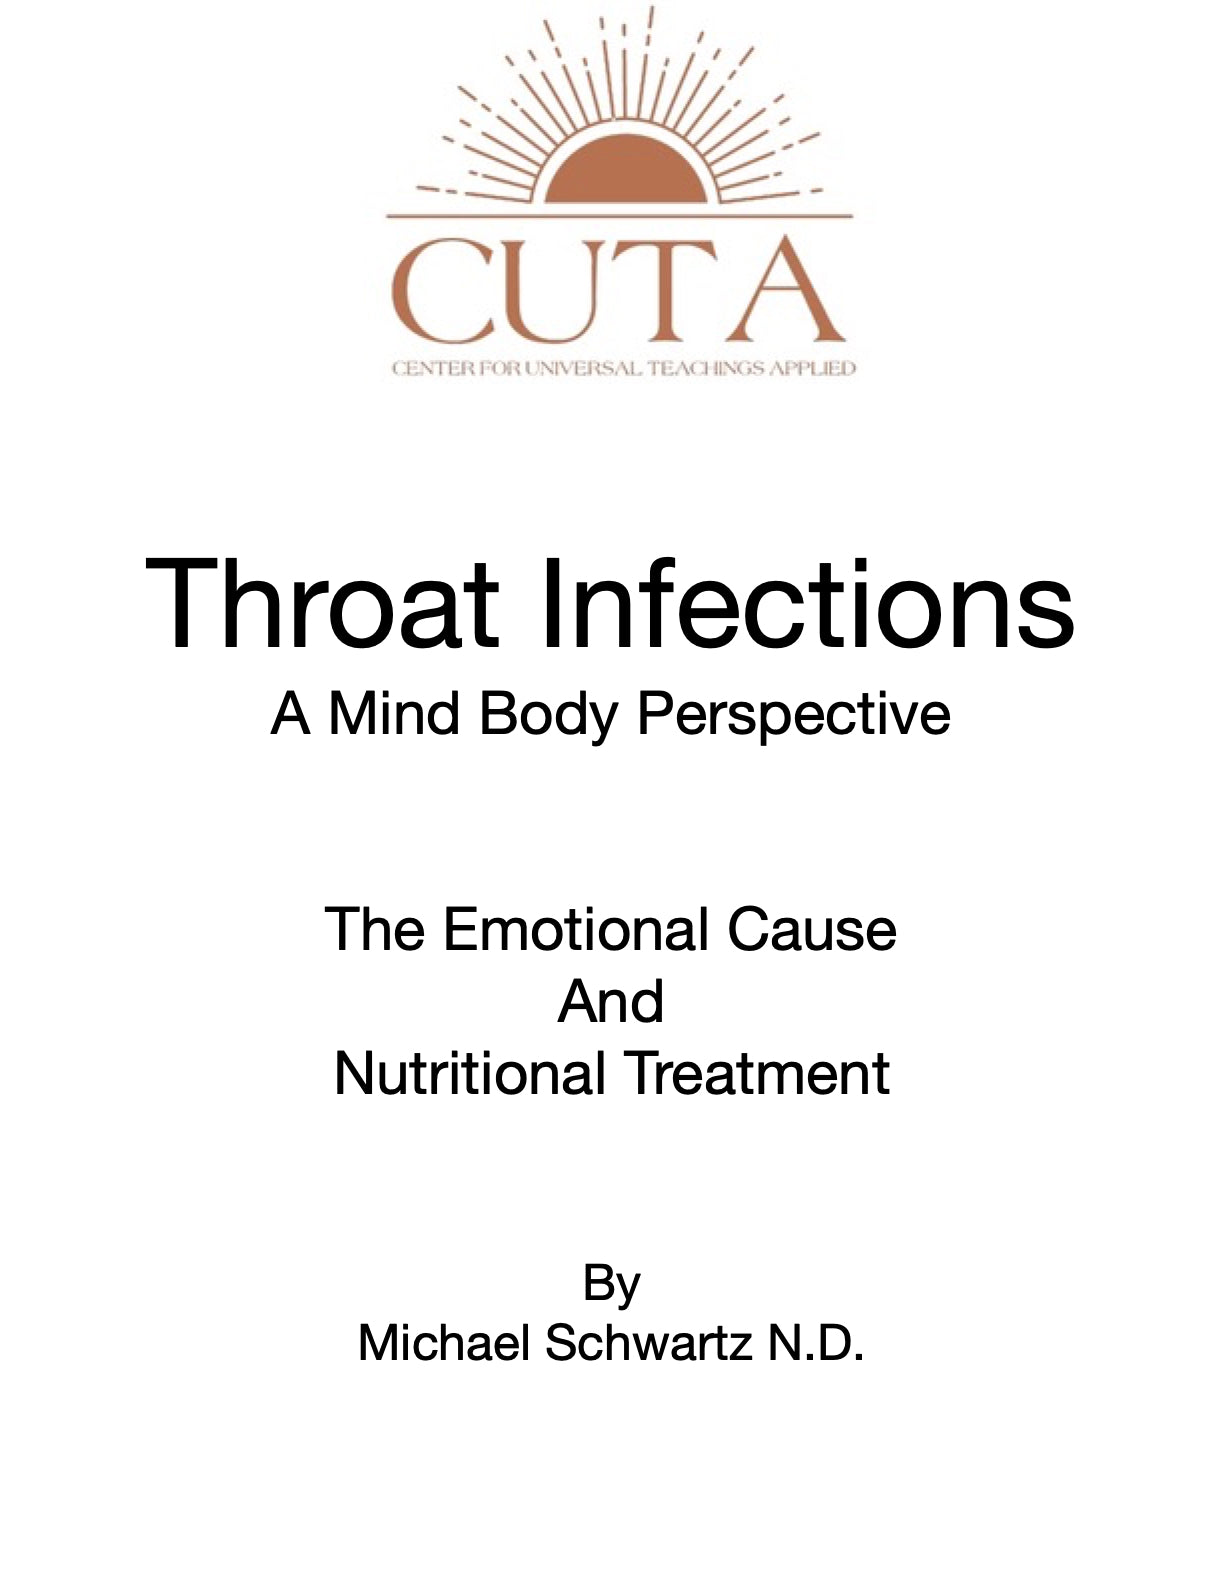 Throat Infections Booklet